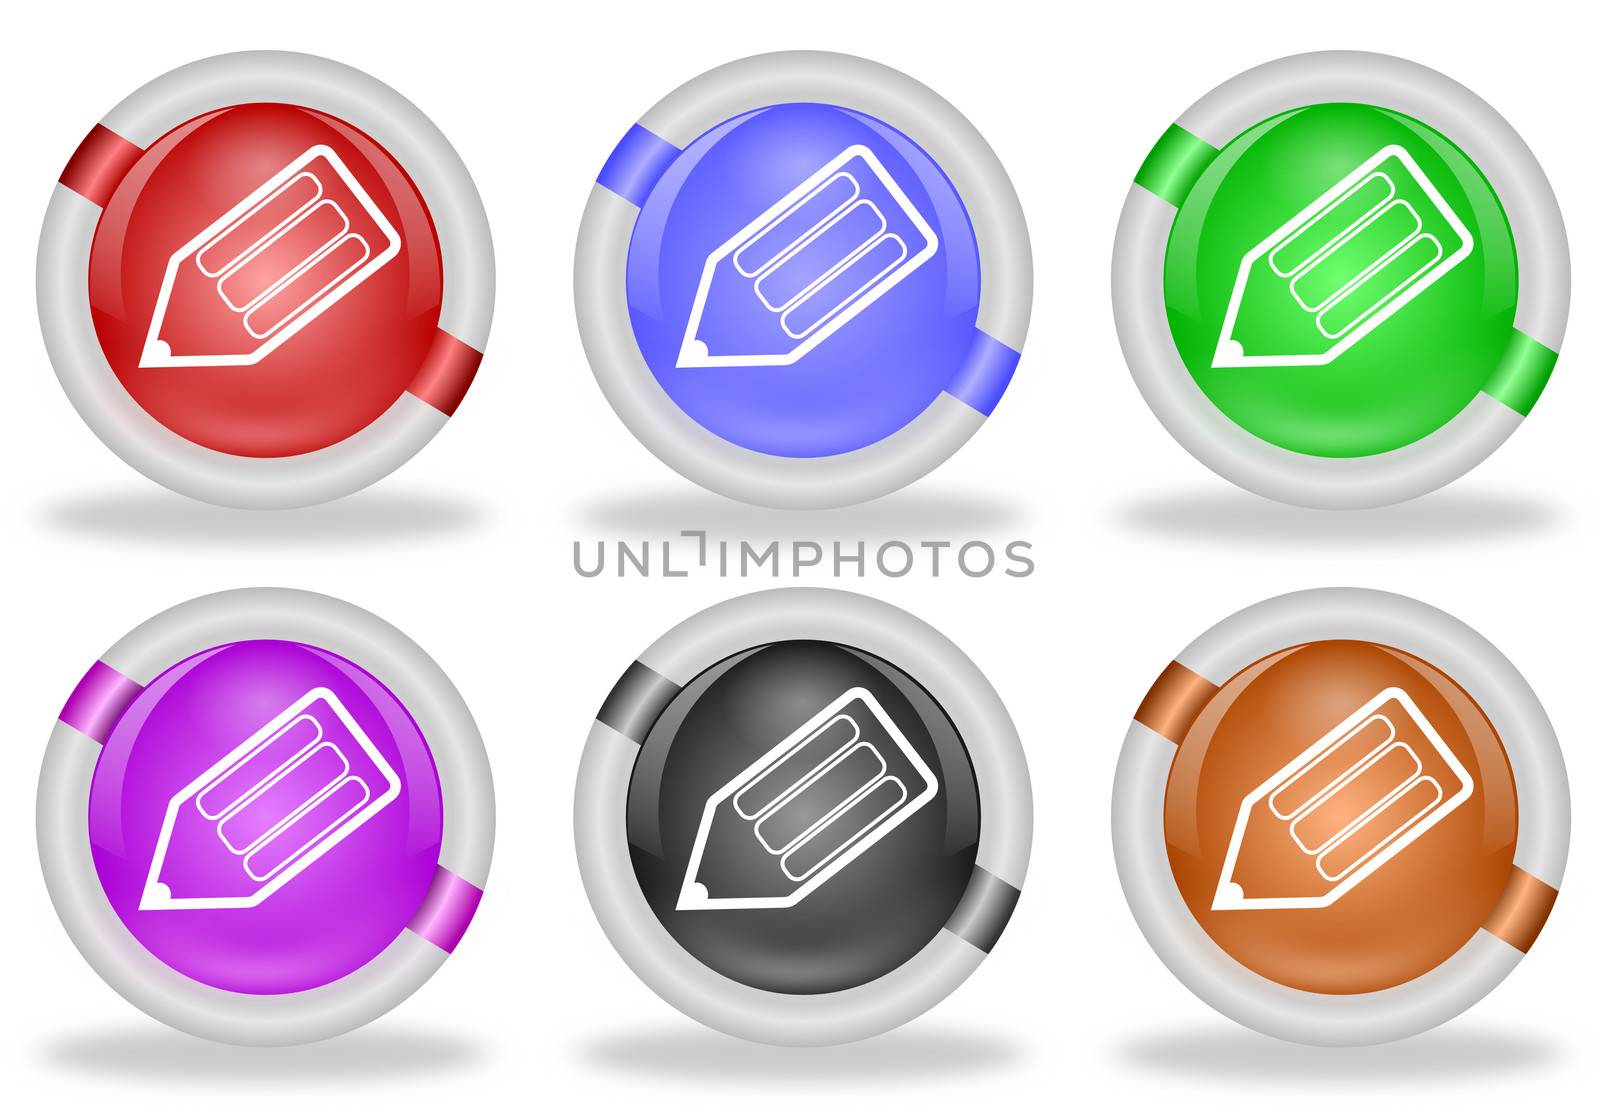 Set of pencil or write web icon buttons with beveled white rims in six pastel colors
